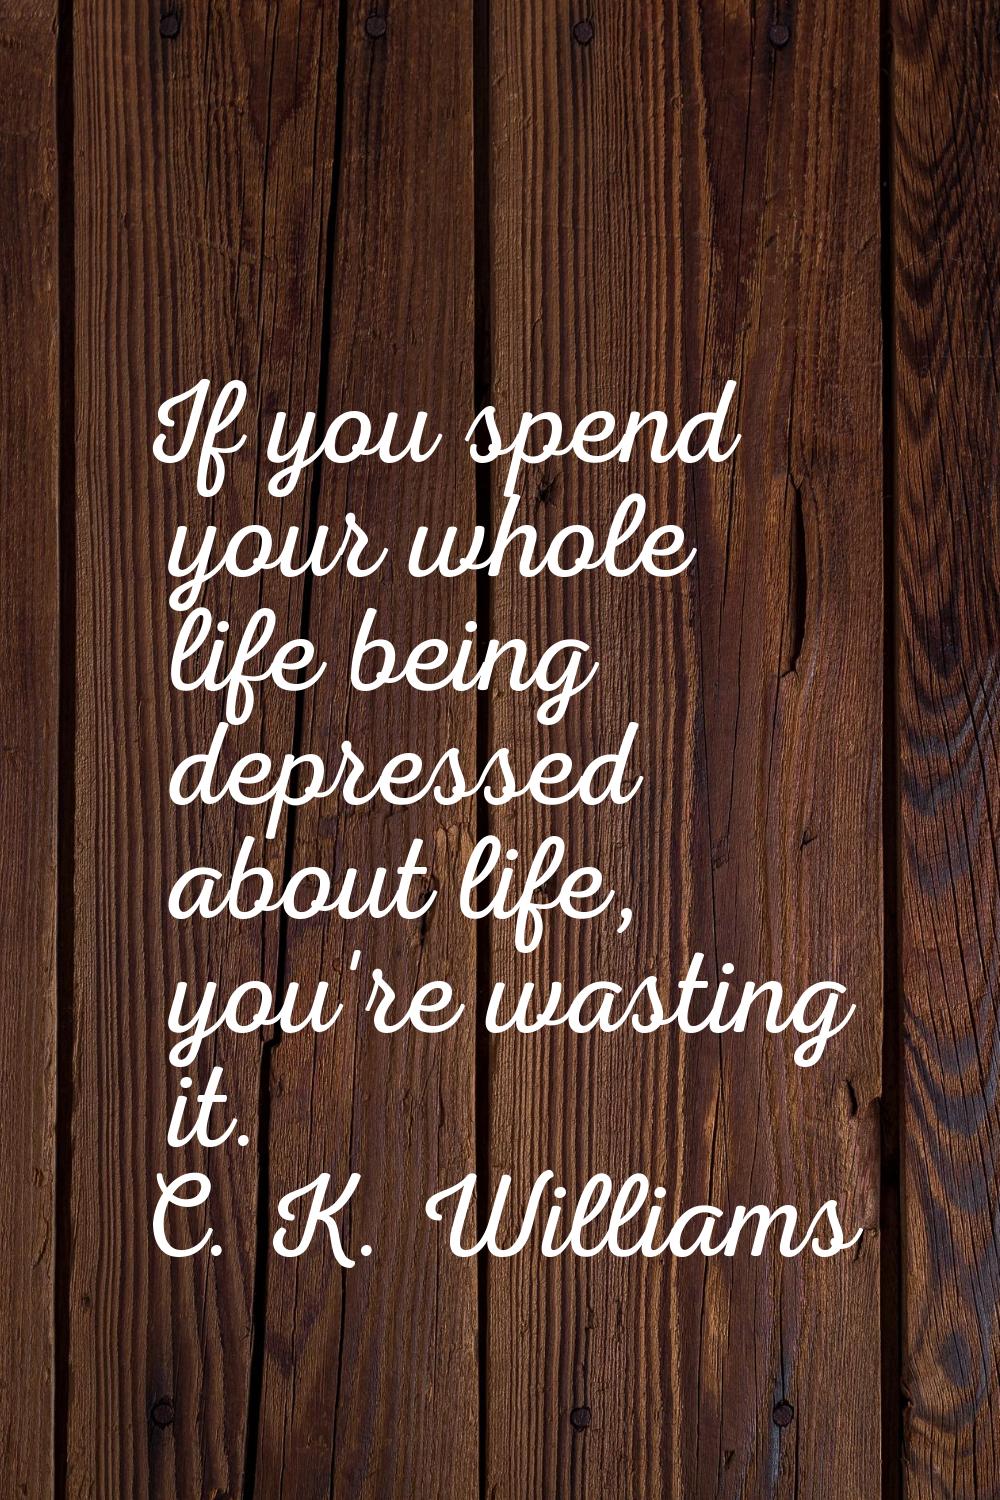 If you spend your whole life being depressed about life, you're wasting it.